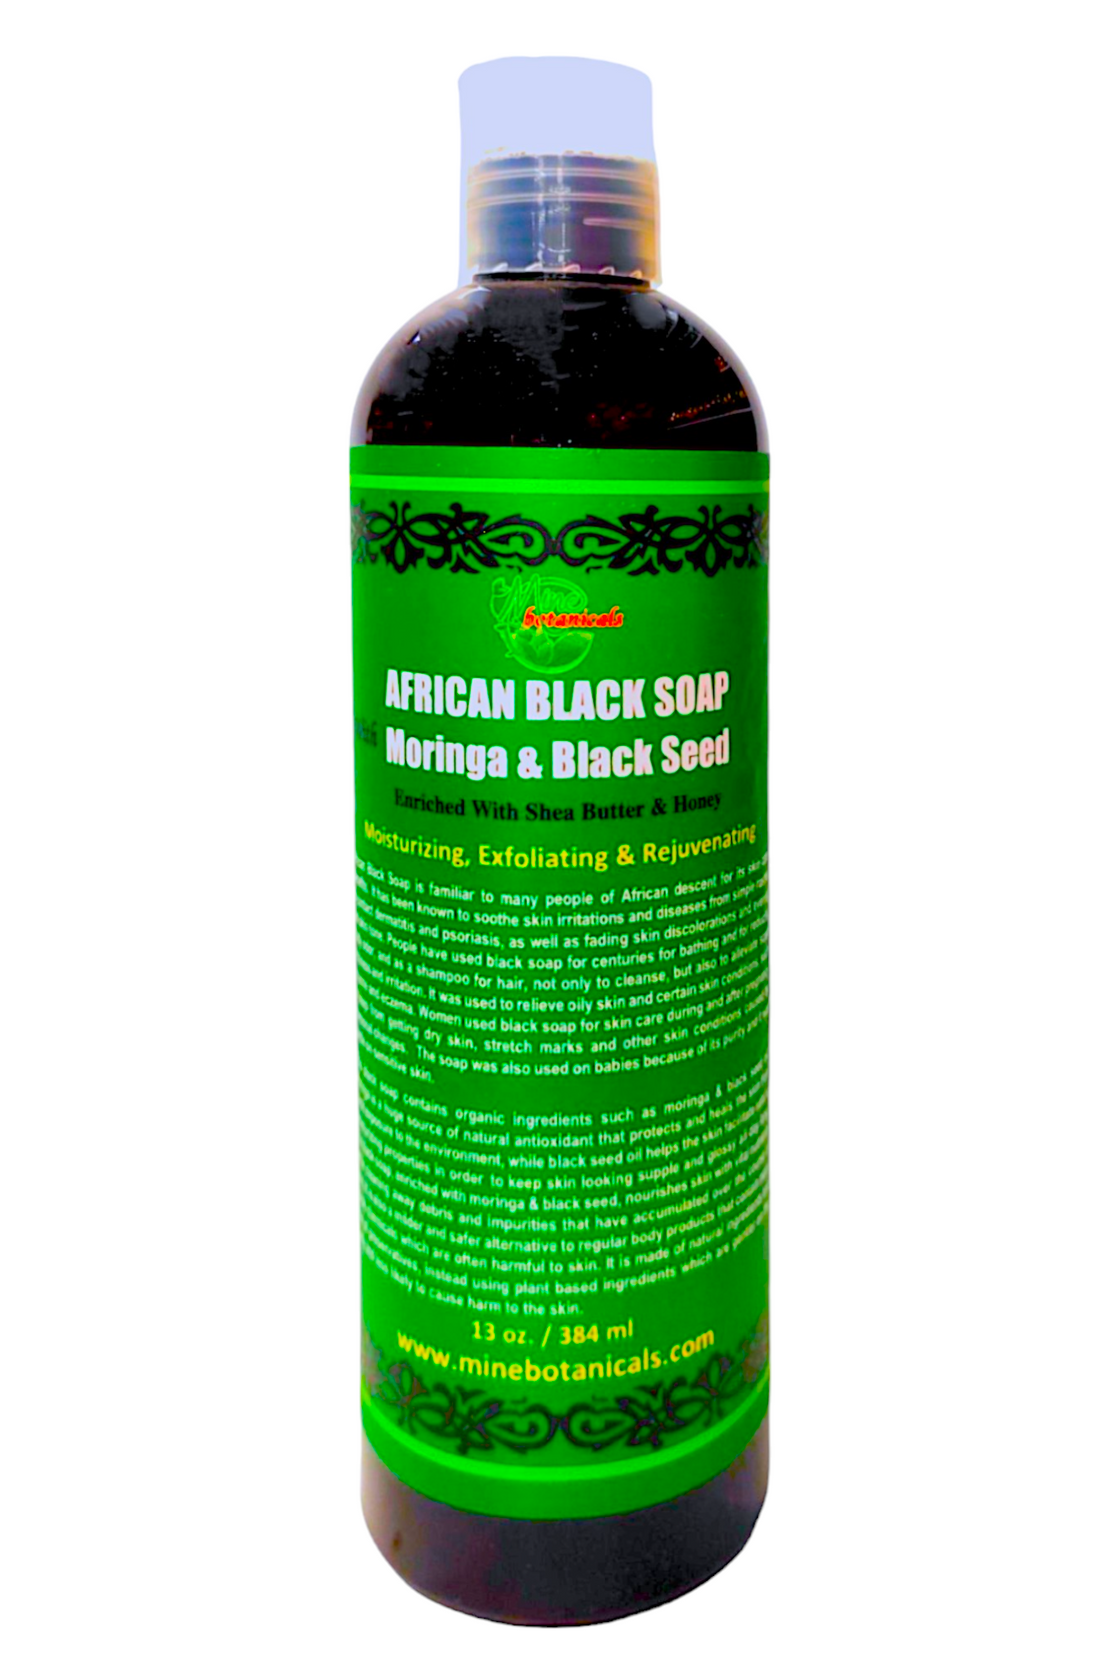 African Black Soap With Moringa & Black Seed